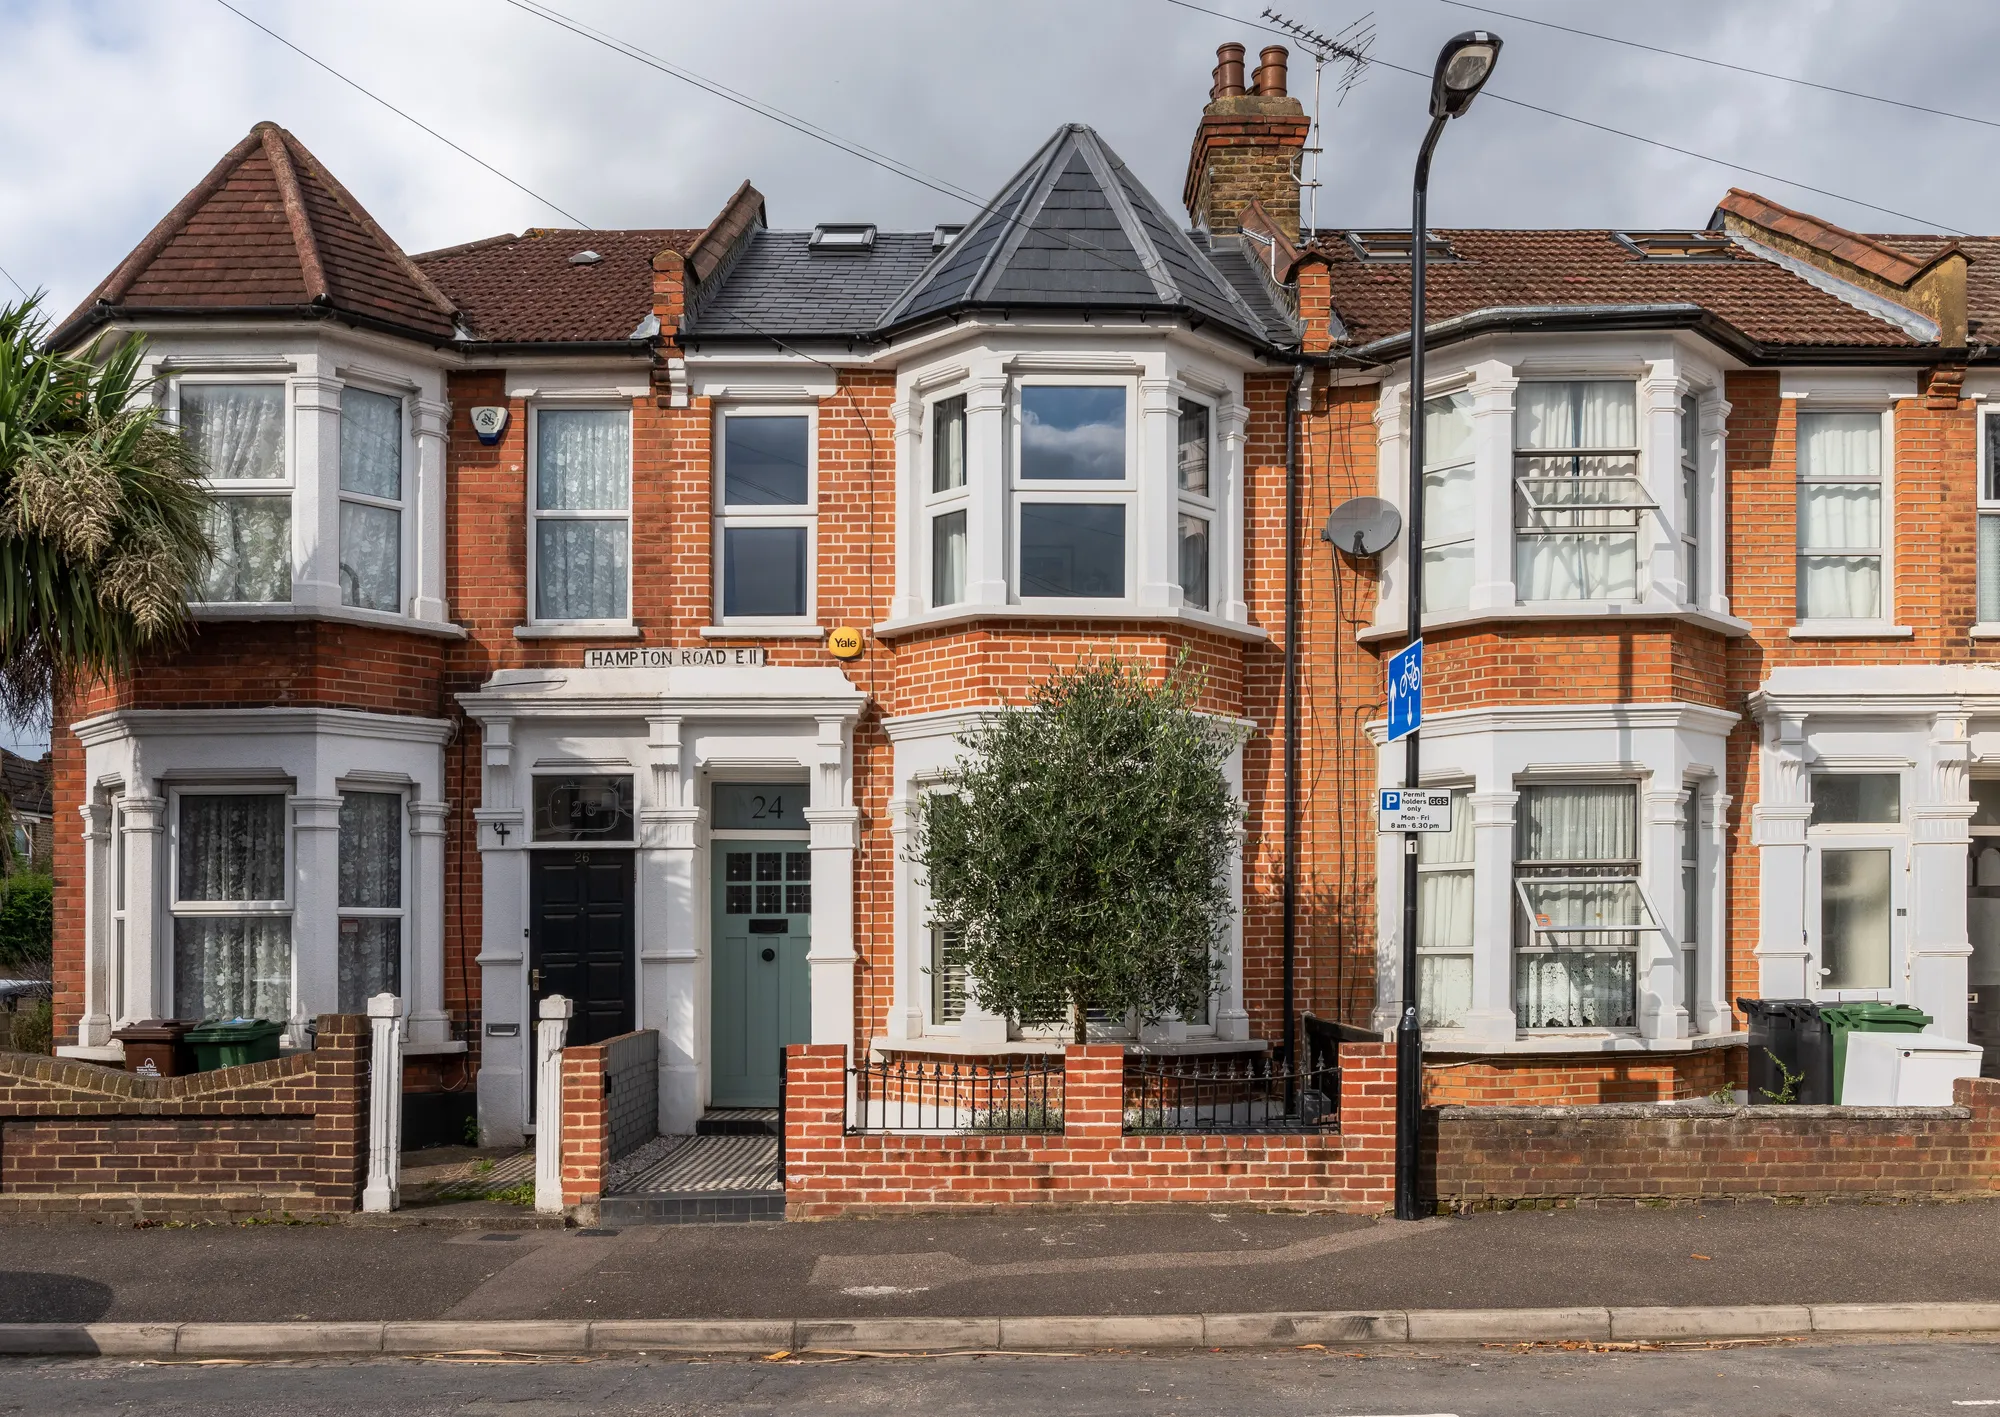 4 bed mid-terraced house for sale in Hampton Road, Leytonstone - Property Image 1